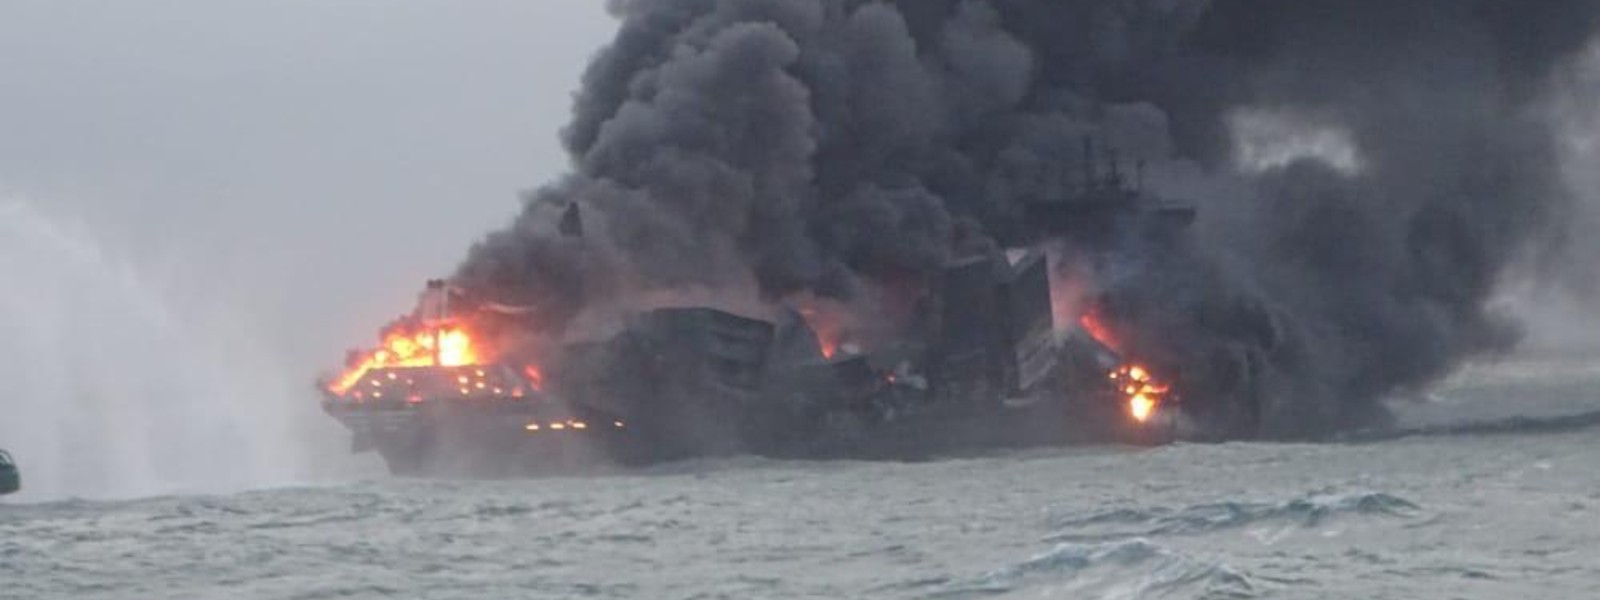 Fire on X-Press Pearl vessel yet to be brought completely